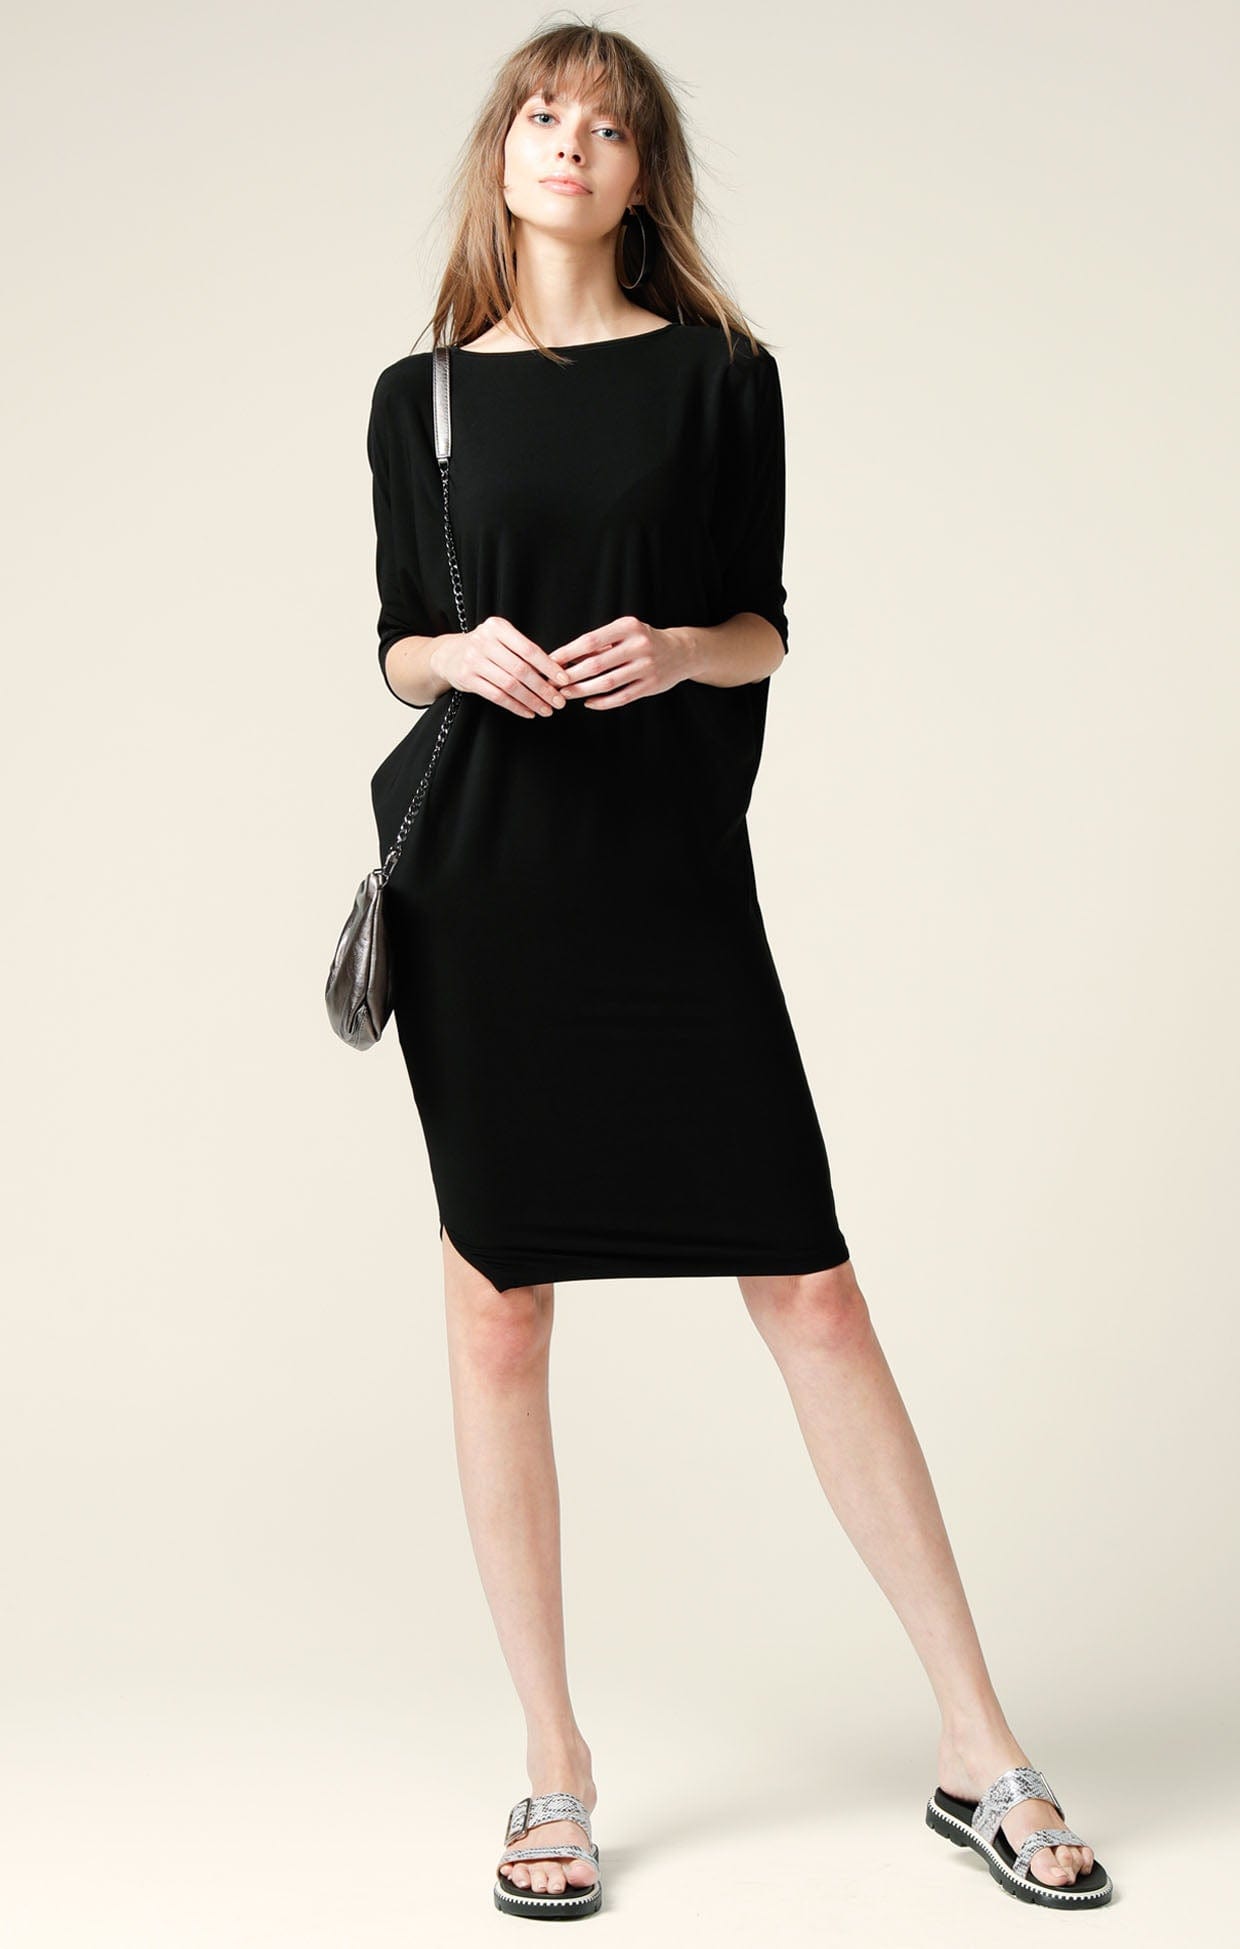 Dresses Multi Occasion BATWING DRESS IN BLACK